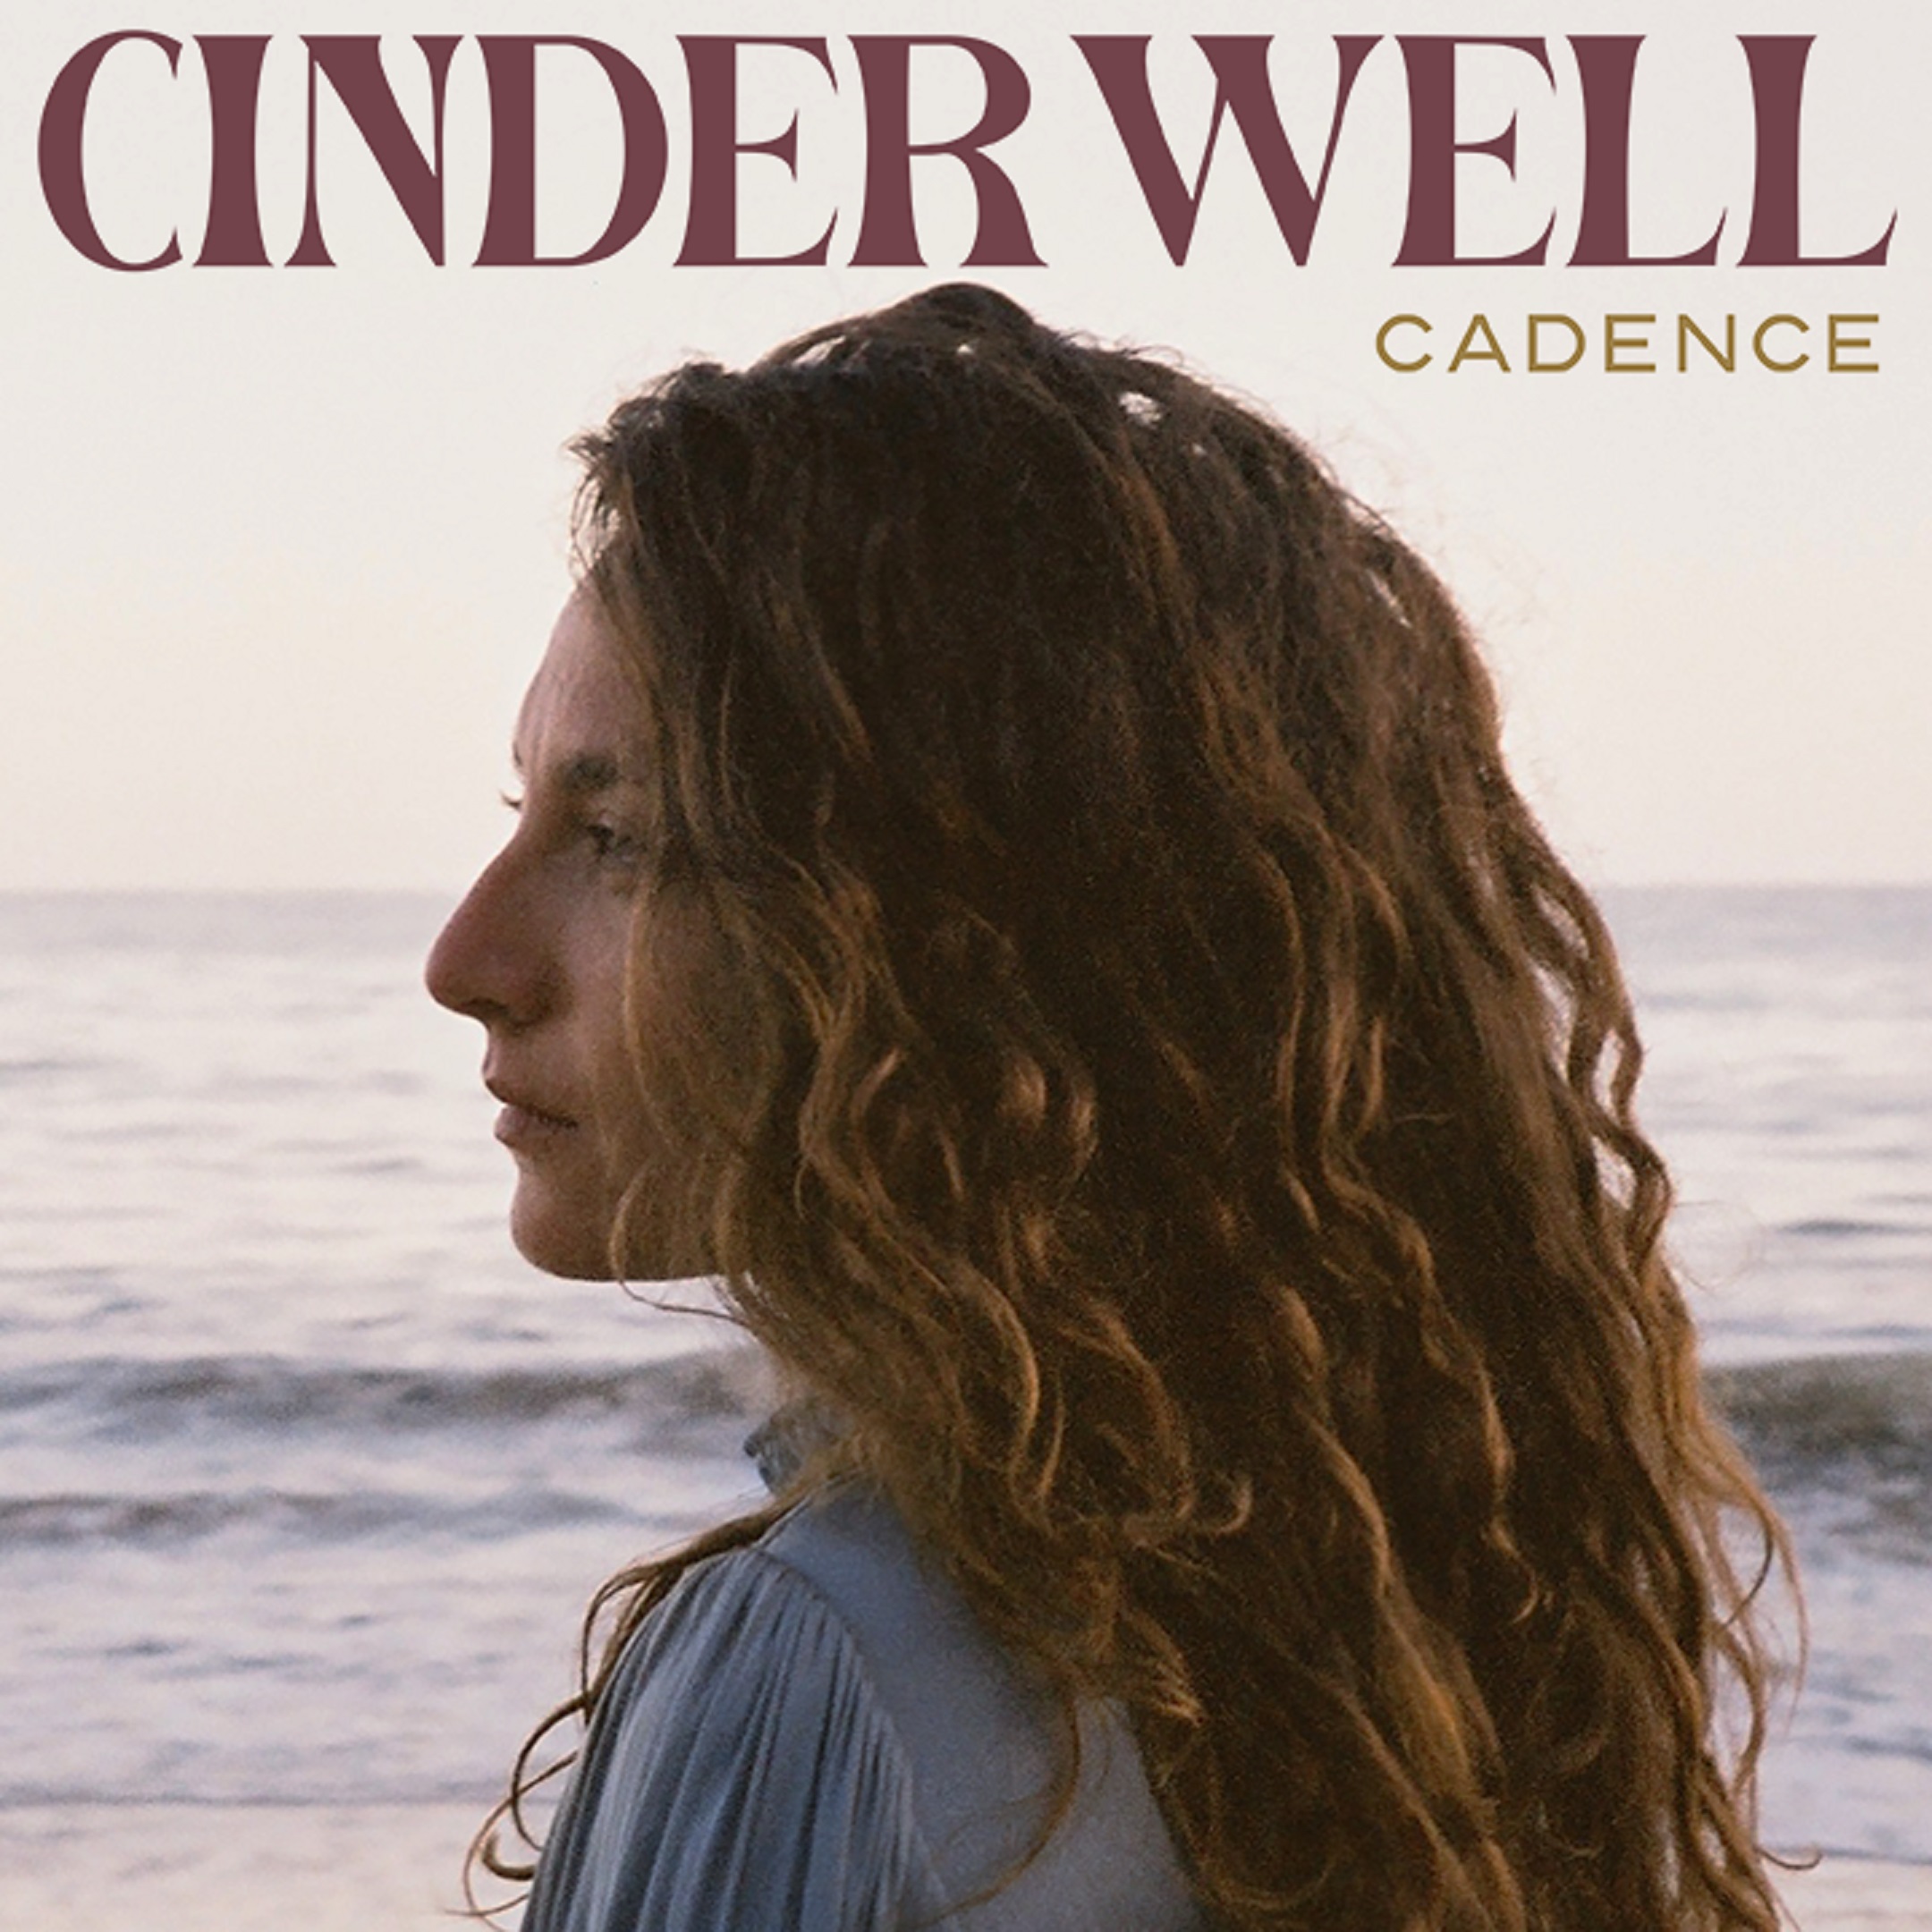 Cadence: Echoes of California and Ireland in Cinder Well’s Latest Album